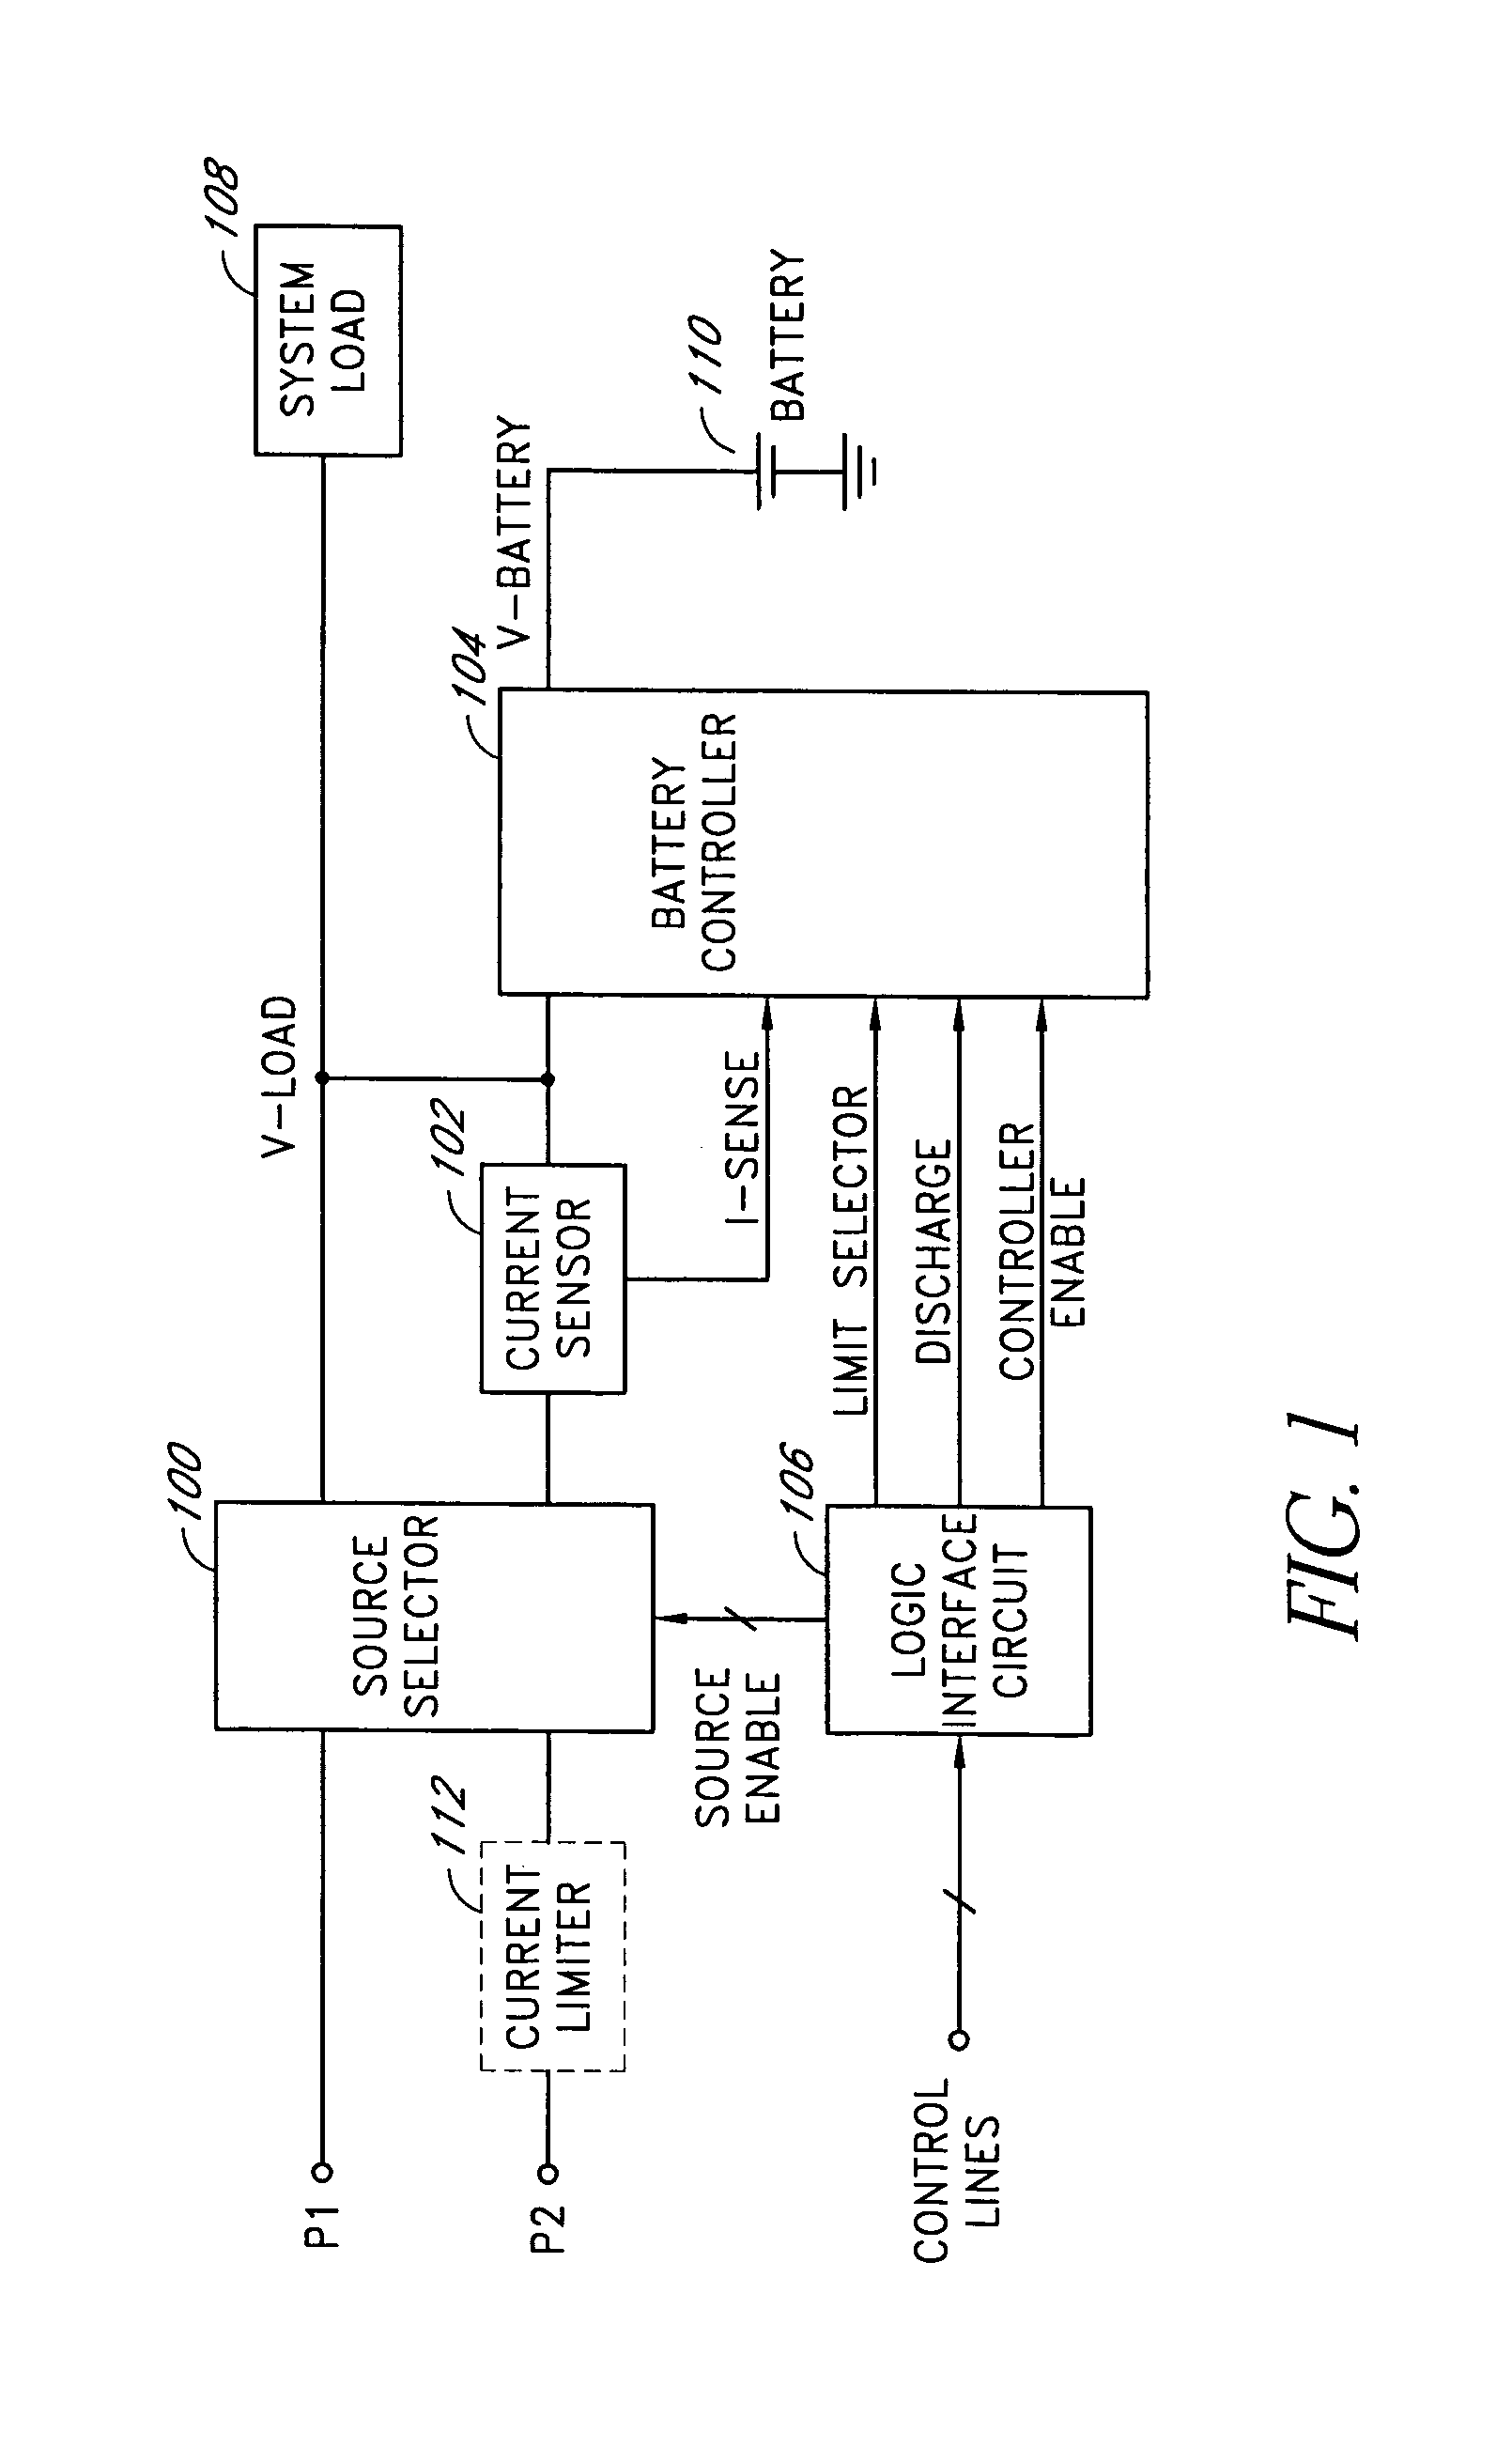 Battery charging and discharging by using a bi-directional transistor